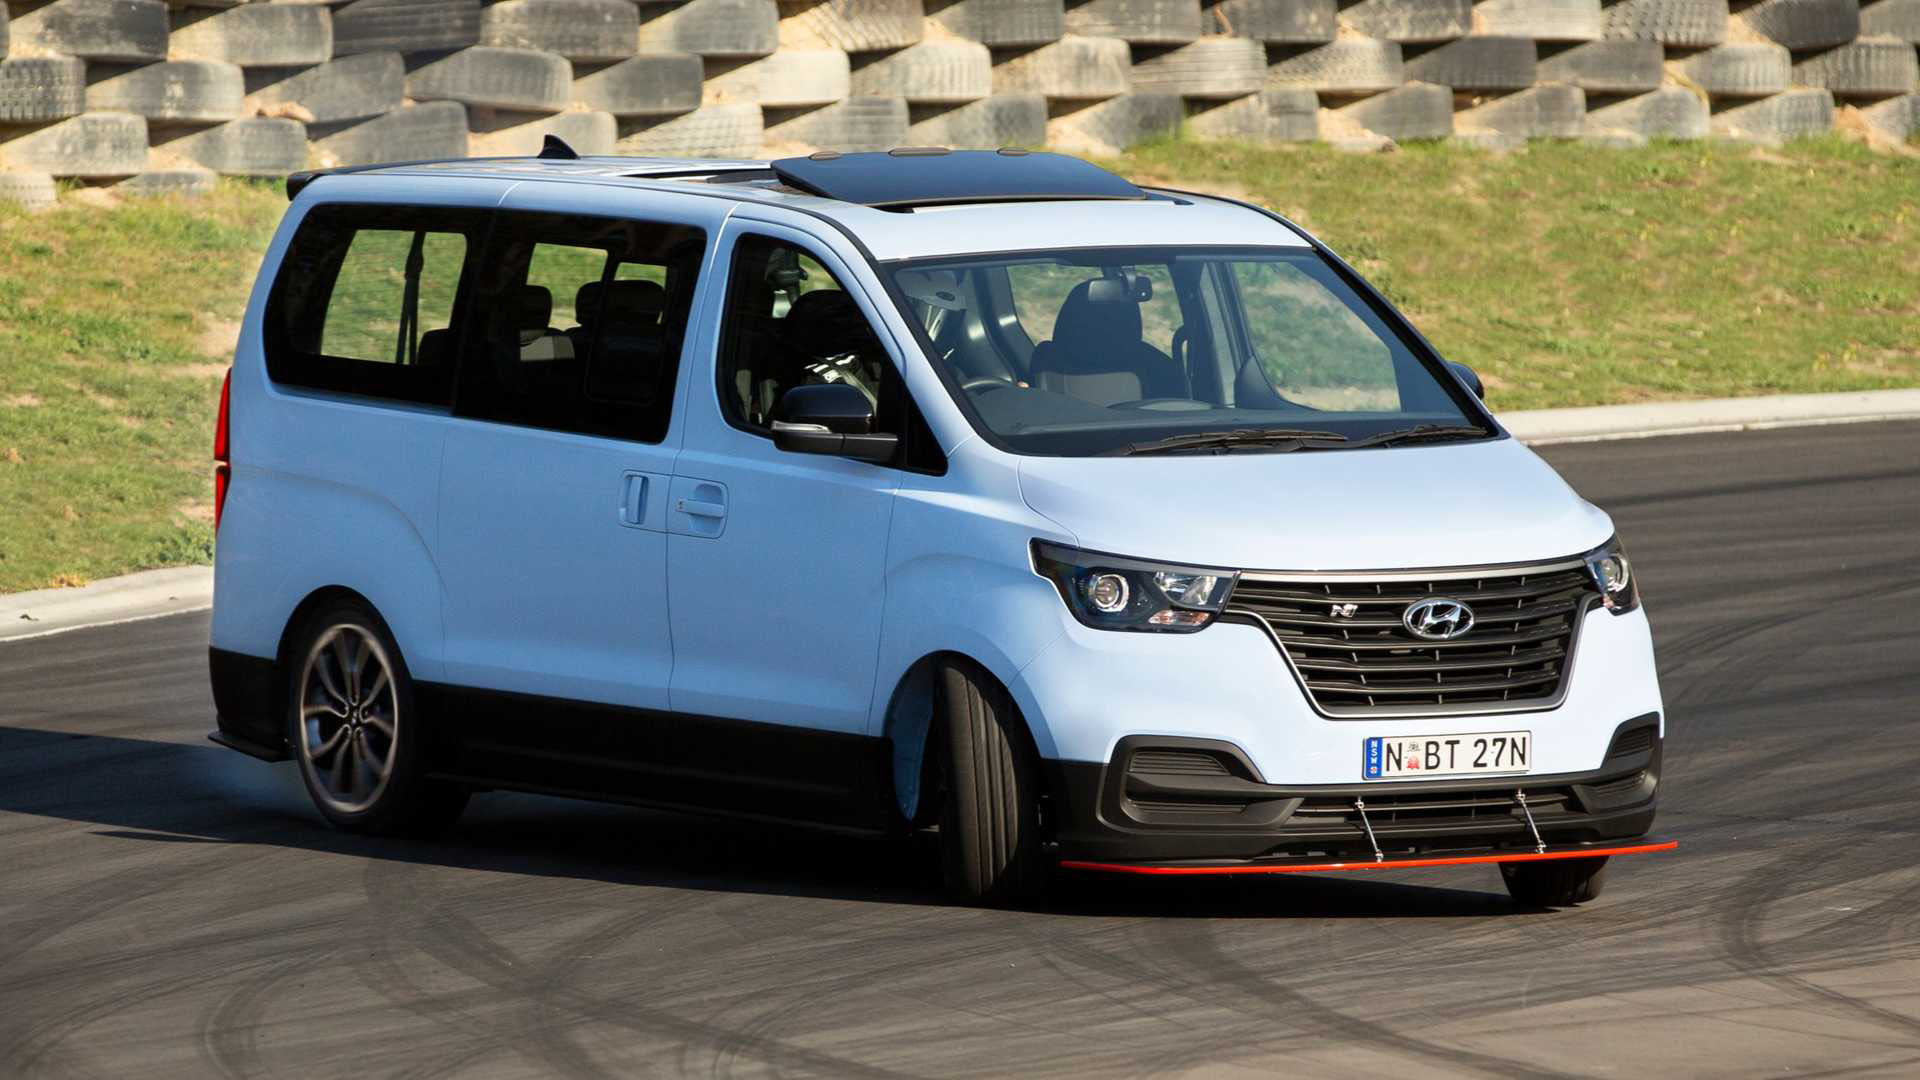 top gear’s top 9: minivans that are cooler than suvs